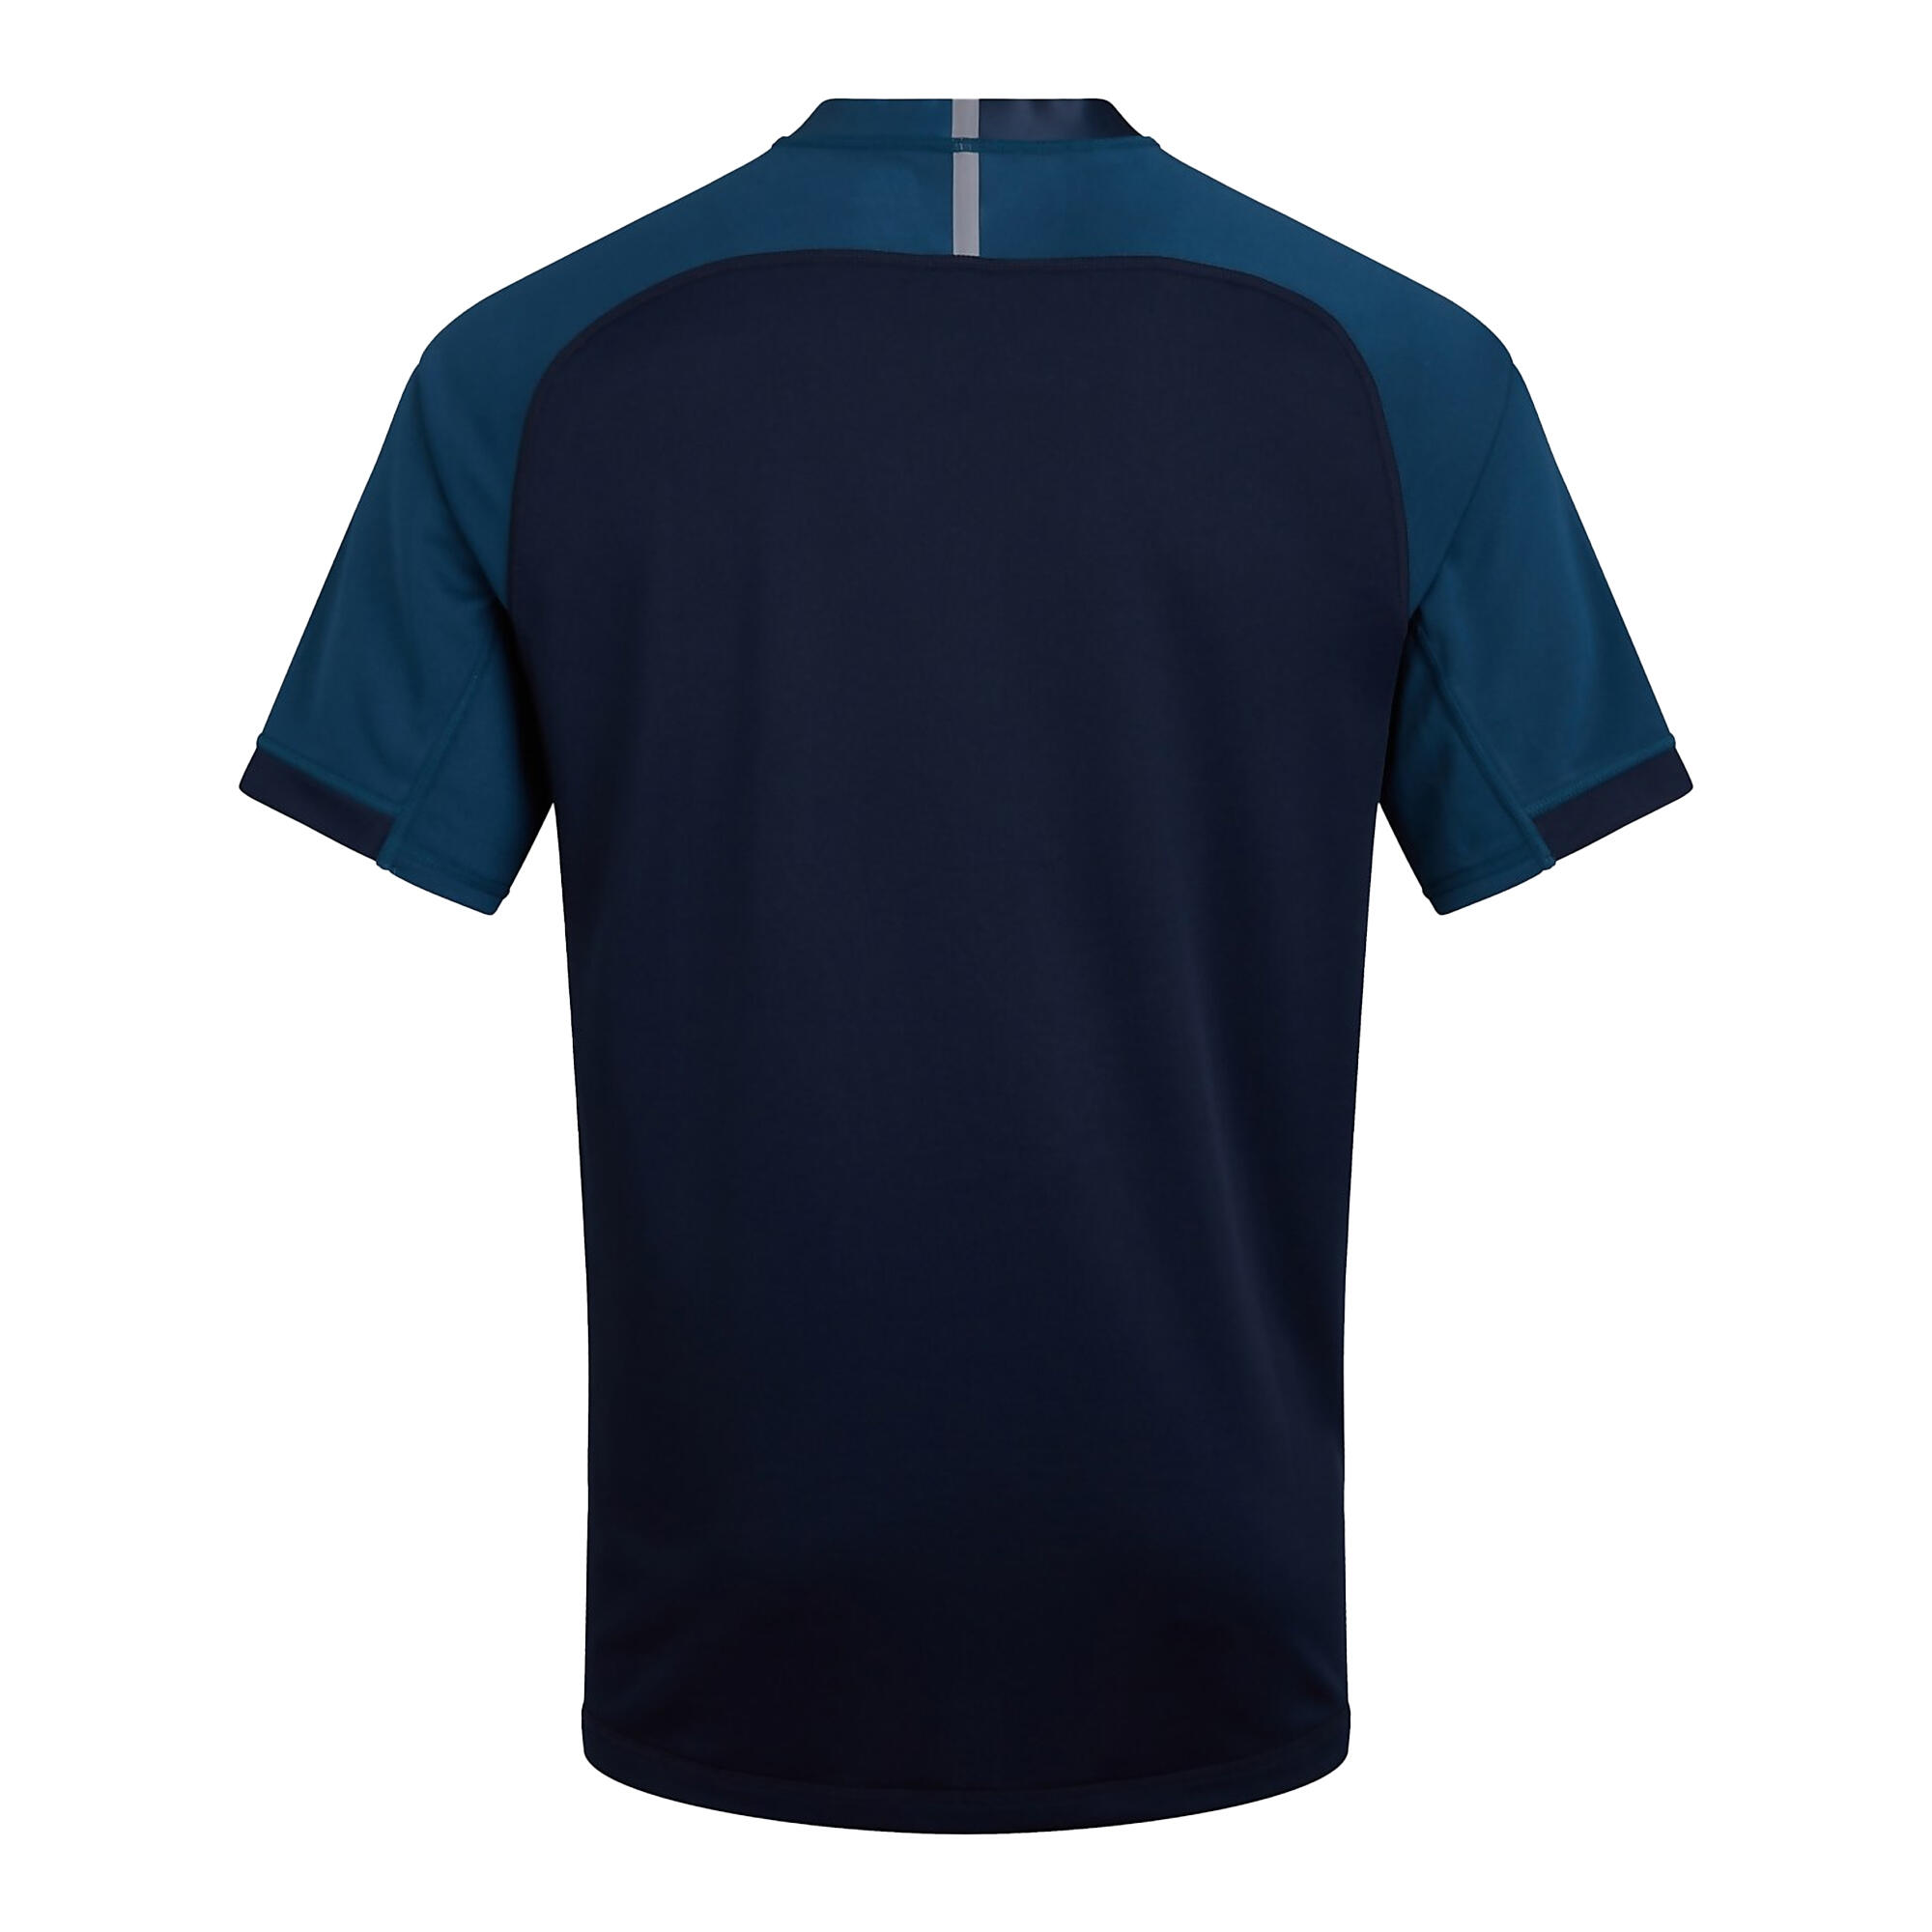 Adults Unisex Evader Jersey (Navy) 2/4